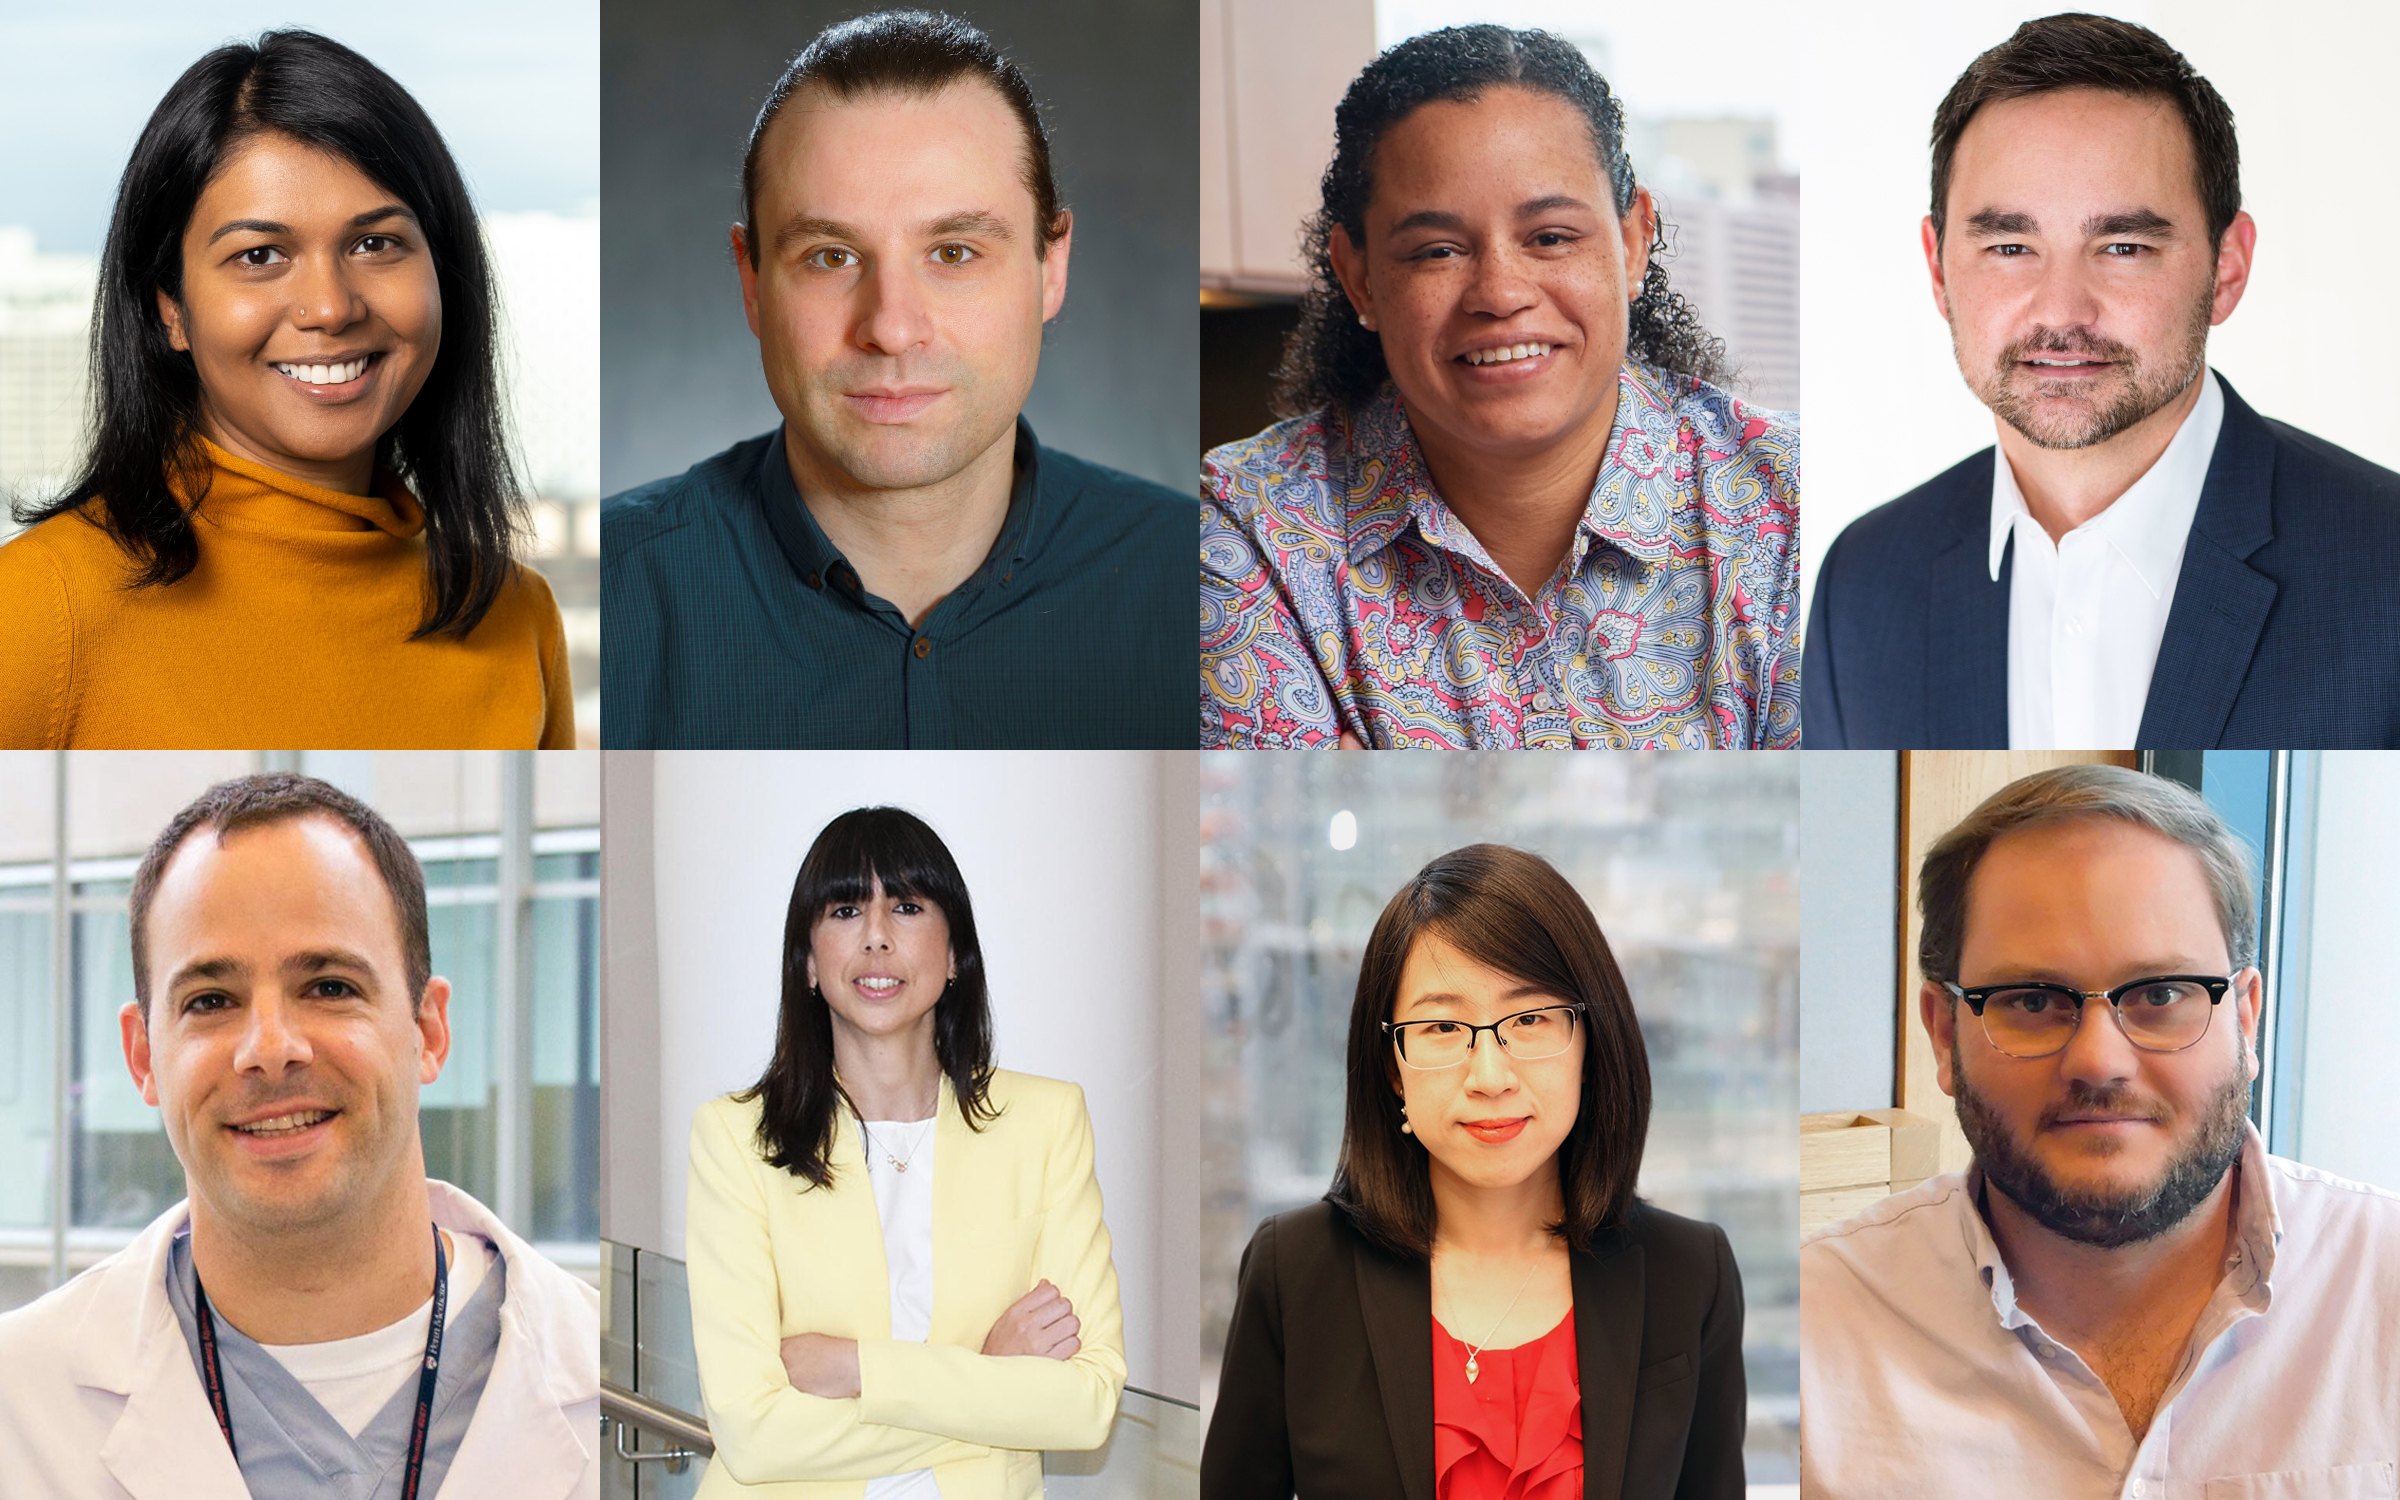 Eight Penn scientists have received NIH grants through High-Risk, High-Reward Research program. They are pictured left to right, top to bottom: Perelman School of Medicine’s Bushra Raj, Luca Busino, Donita Brady, Eric Witze, Terence Gade, Amelia Escolano, Chengcheng Jin, and George Burslem.